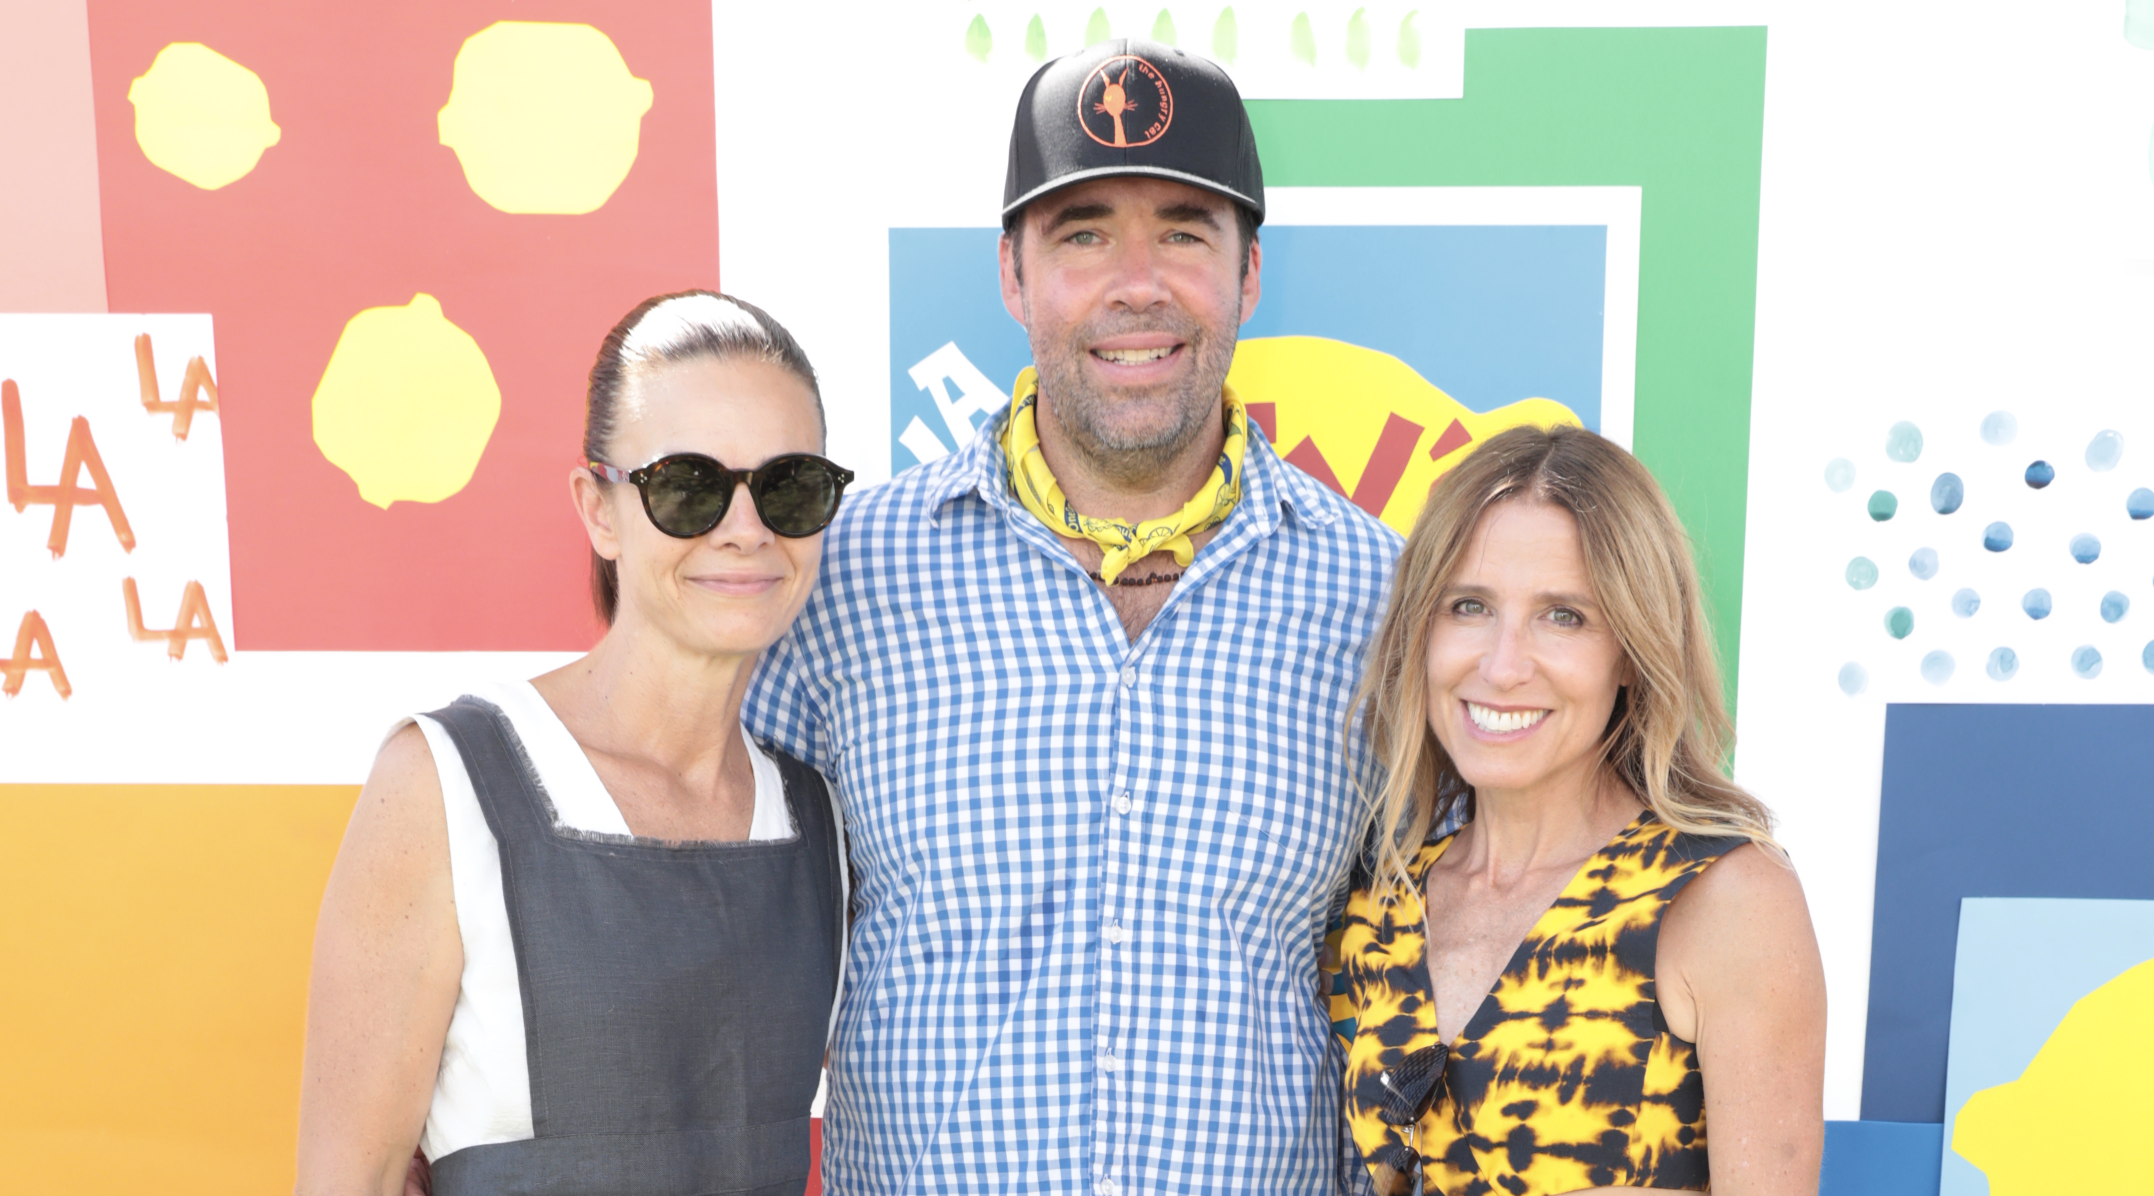 LA Loves Alex's Lemonade returns with Dozens of World-Class Chefs and Lots of Flavor on September 23!